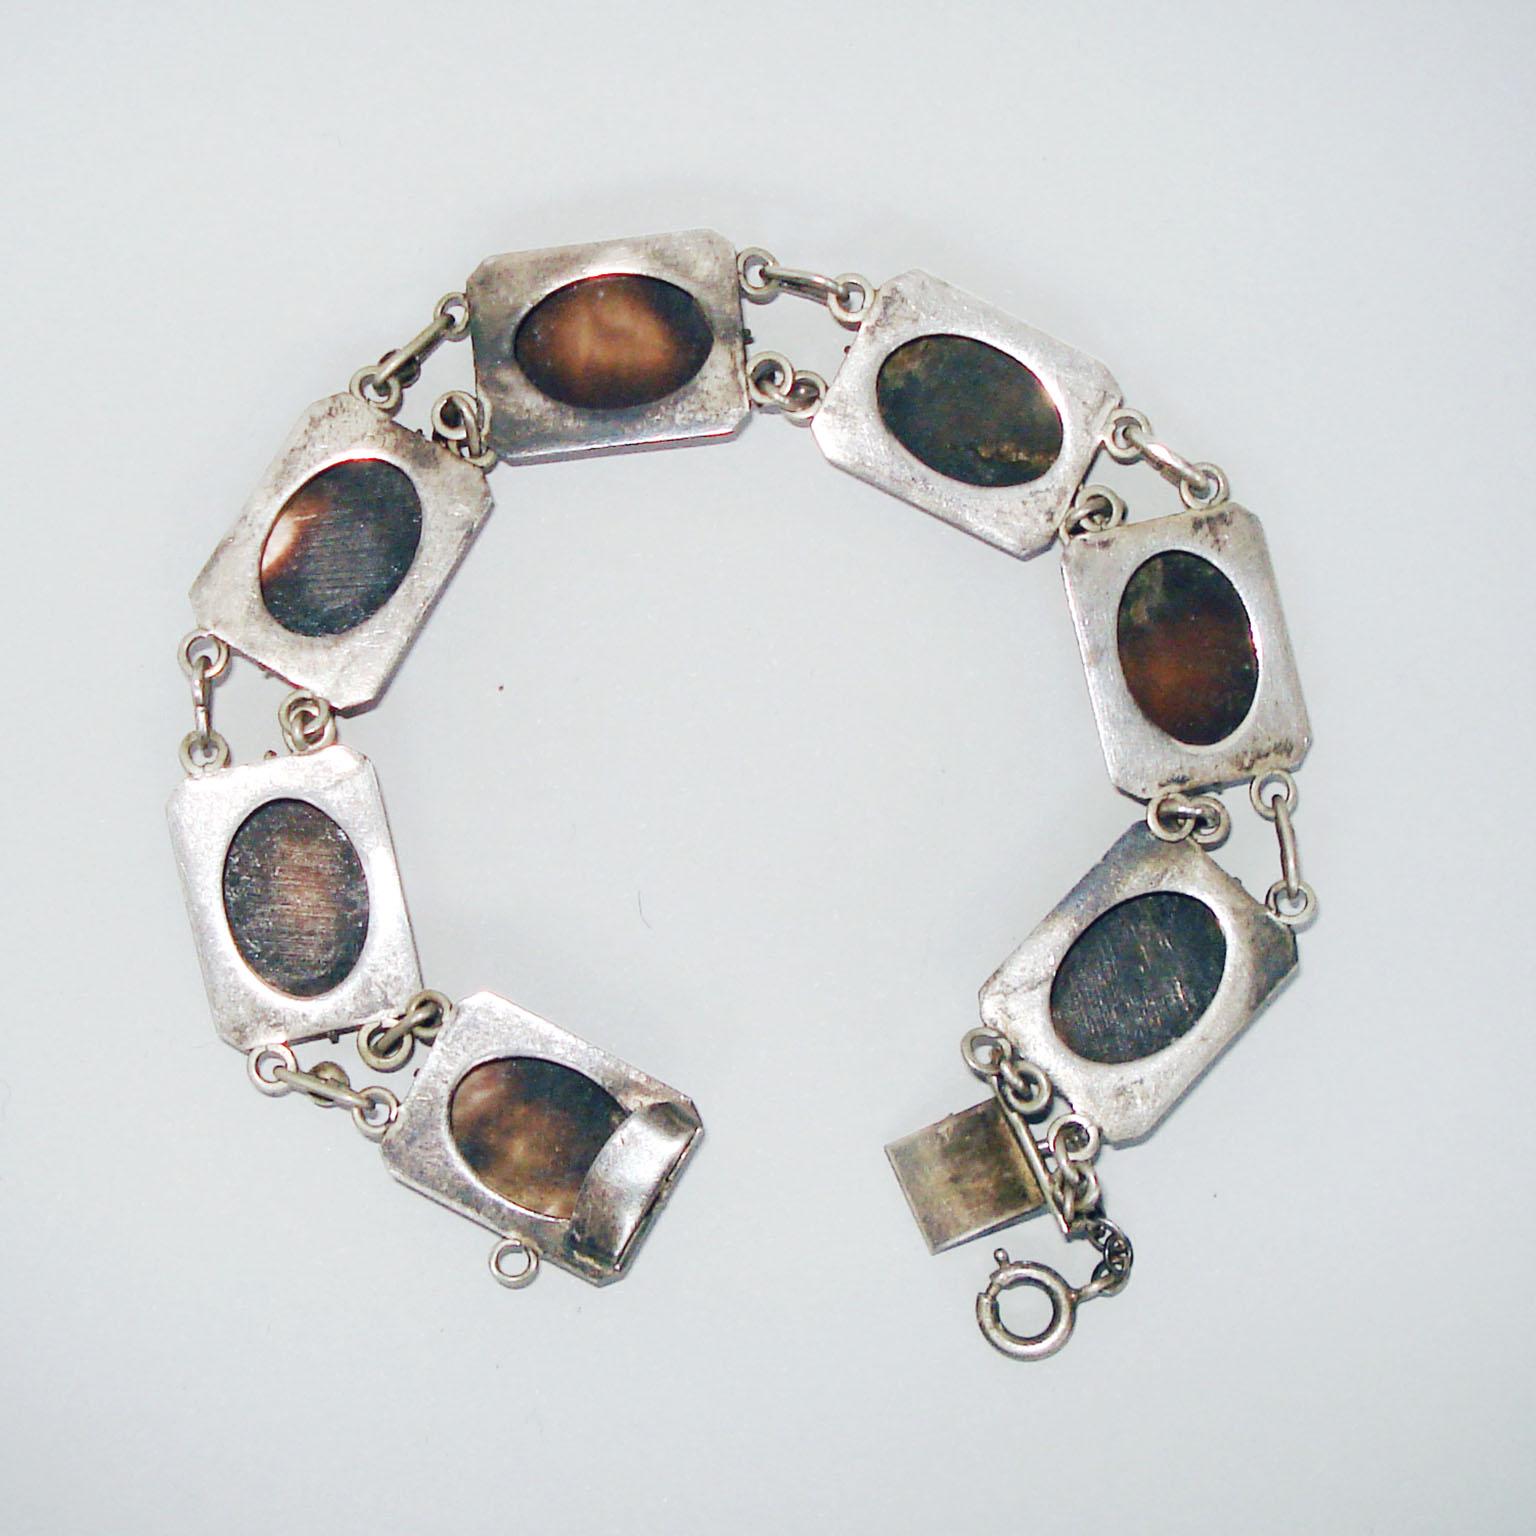 Early 20th Century Art Deco Seven Days Silver Bracelet with Chariots Motif